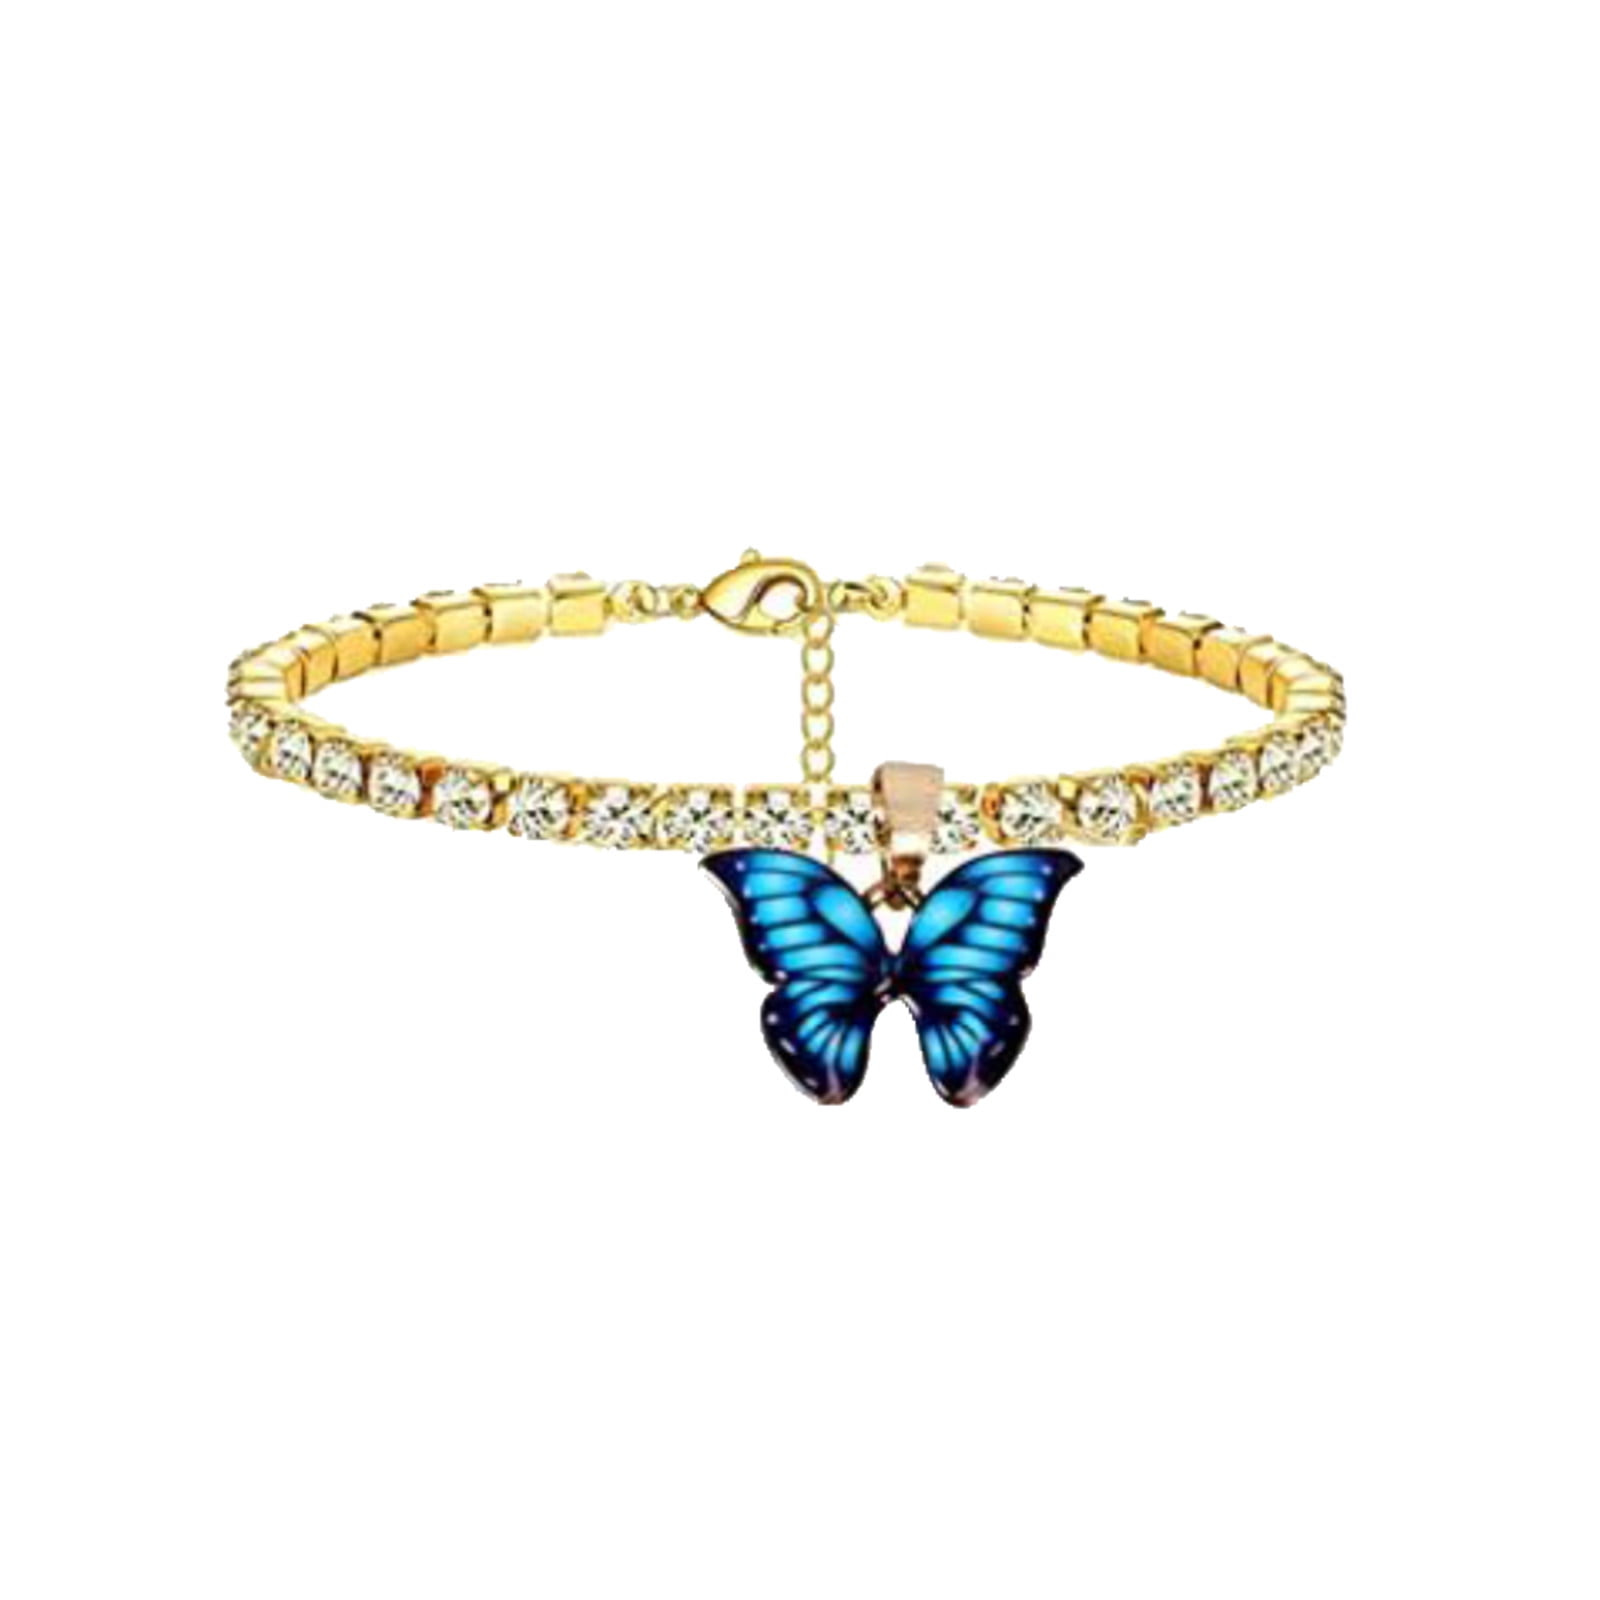 Butterfly Necklace - Small | Fine jewelry solid silver gold-finish  necklaces bracelets earrings